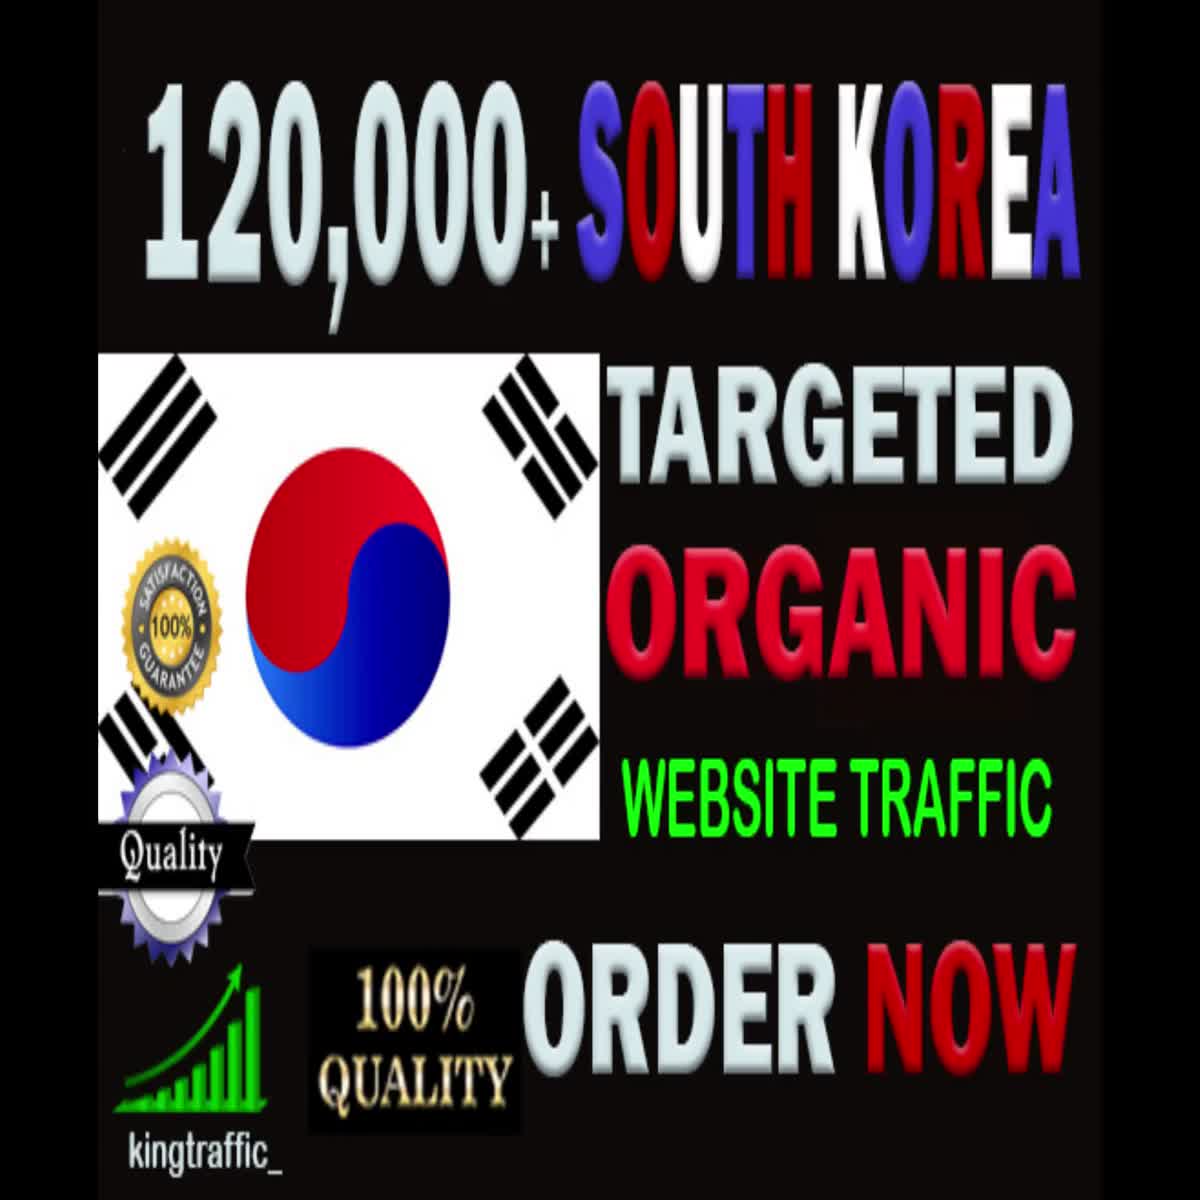 120,000 Quality South Korean web visitors real targeted Organic web traffic from South Korea